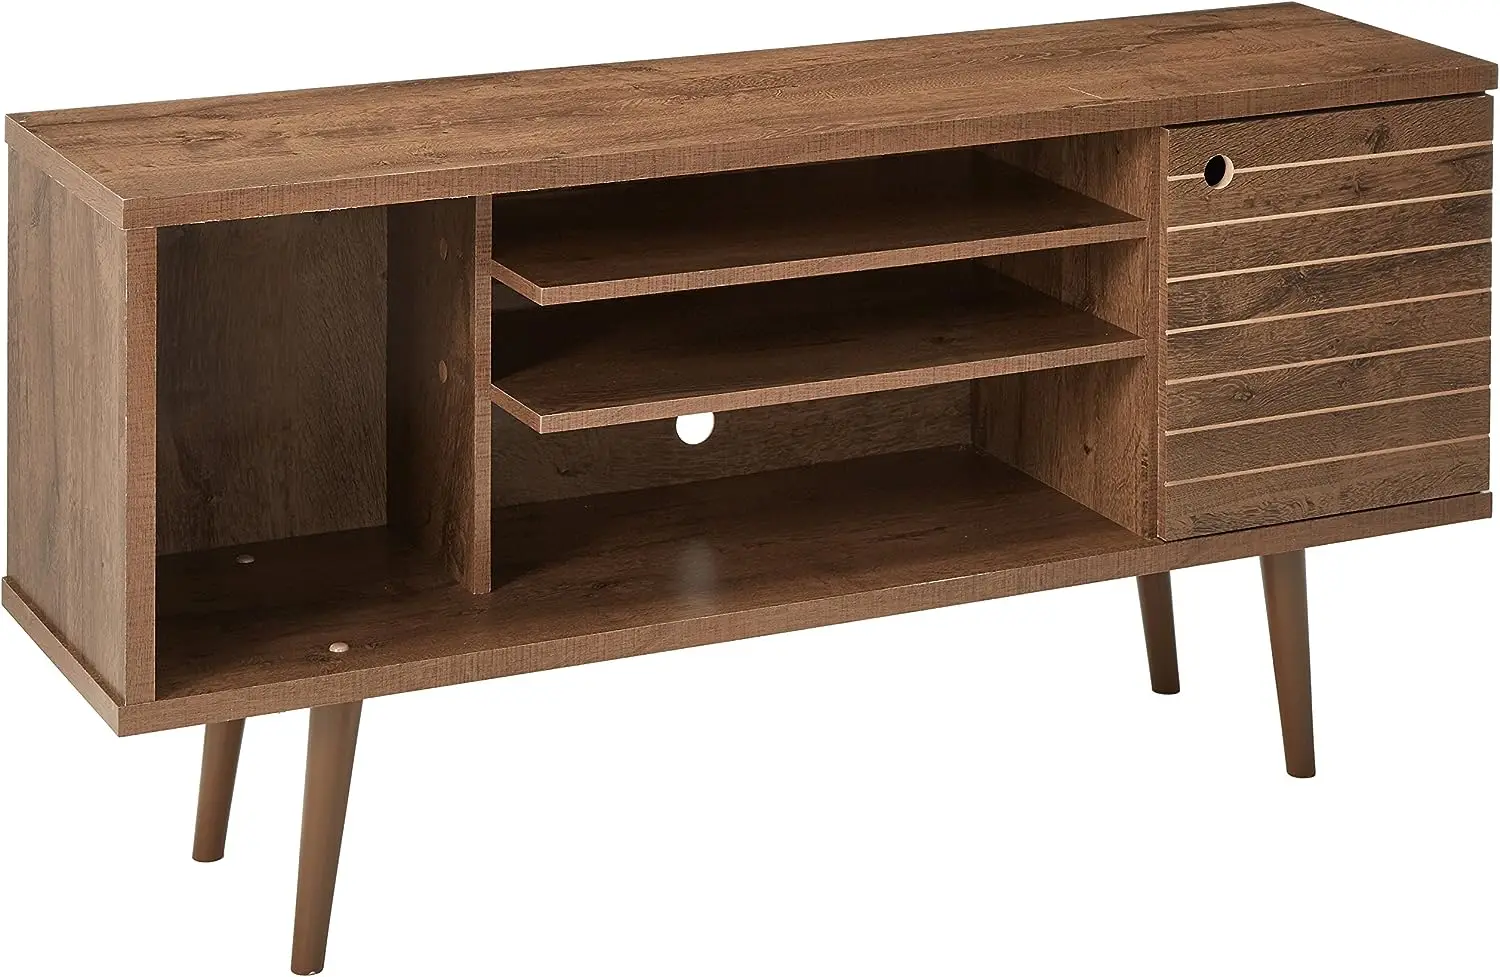 

Mid-Century Modern Living Room TV Stand with Shelves and a Cabinet with Splayed Legs, 200AMC 53.14 Inch, Rustic Brown